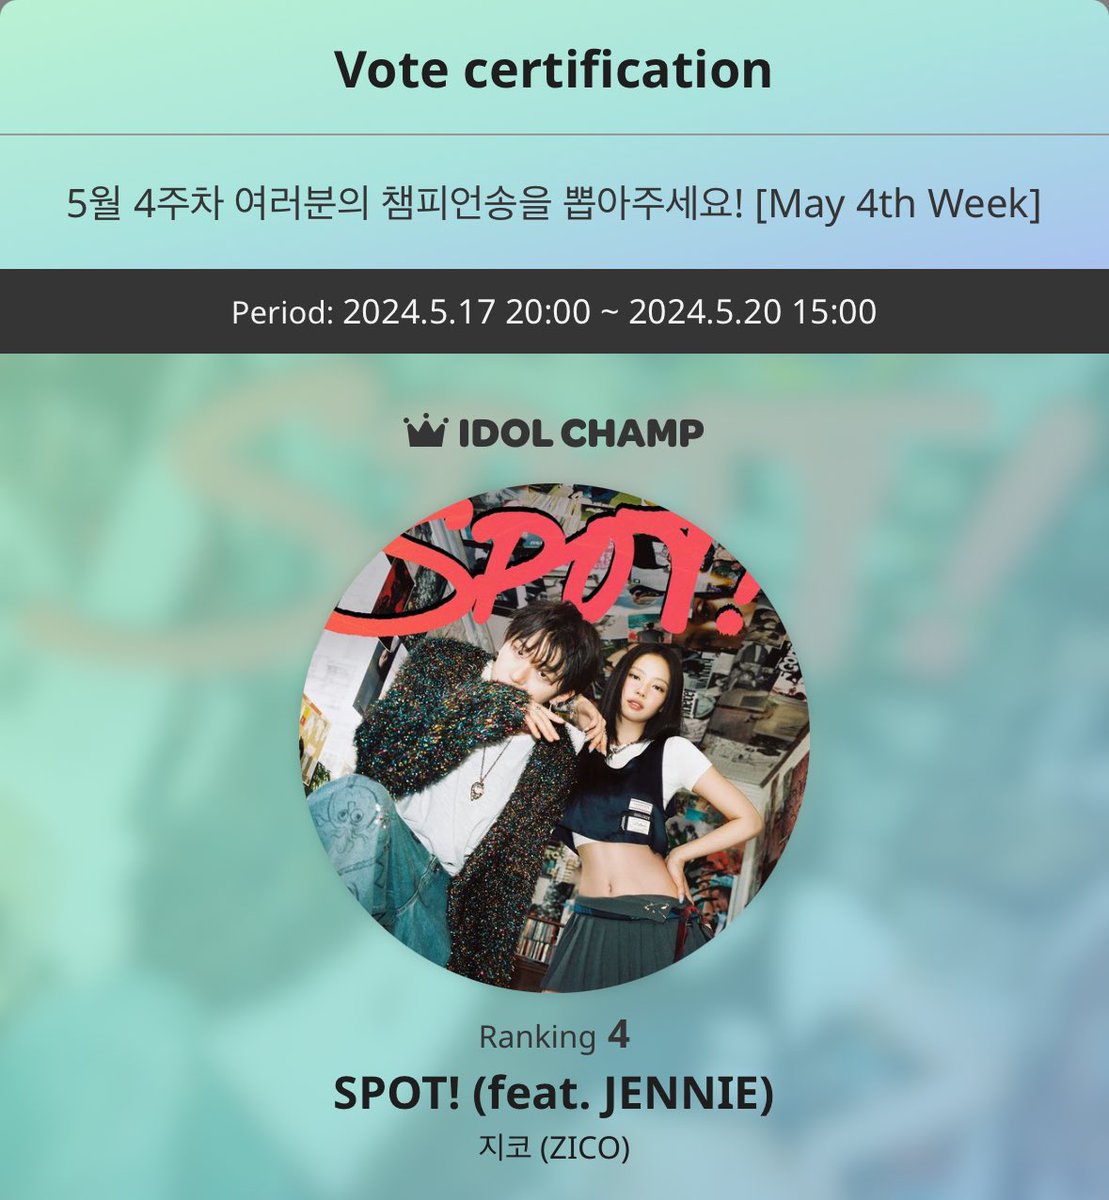 🗳️| BLINKs, this could be Jennie last chance to win. Have you Pre-Vote for #JENNIE?  

Pre-Vote on Idol Champ
👉🏻 tinyurl.com/25aomdnn 
Pre-vote on MNET
👉🏻 mnetplus.world/community/vote 

#SPOTWITHJENNIE #제니 #블랙핑크 
#BLACKPINK @oddatelier